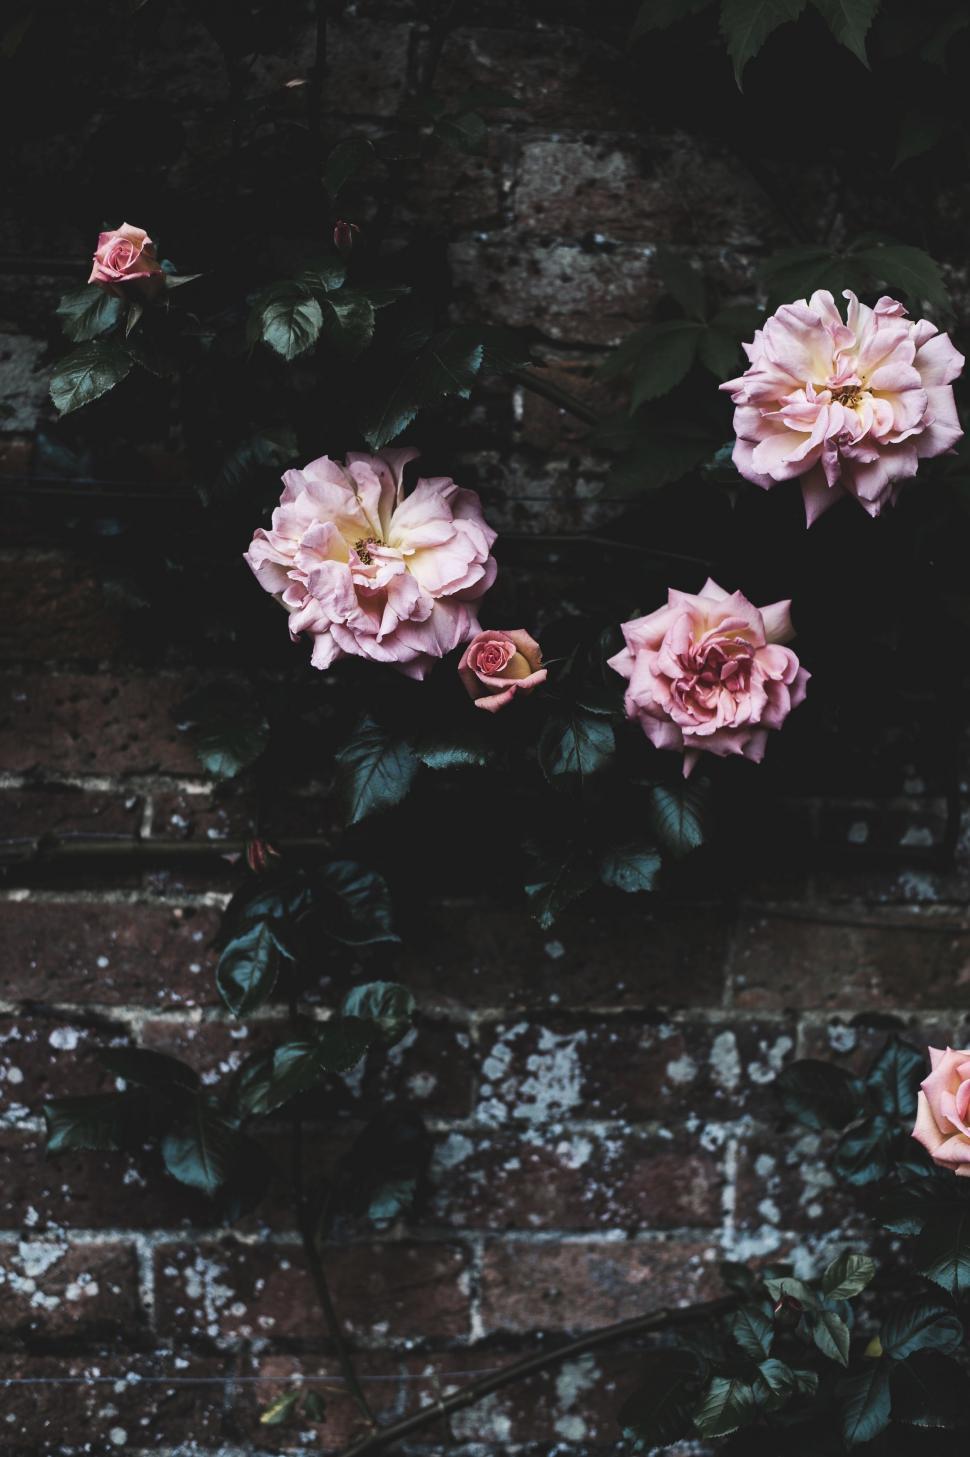 Free Image of Pink Flowers Blooming on a Brick Wall 